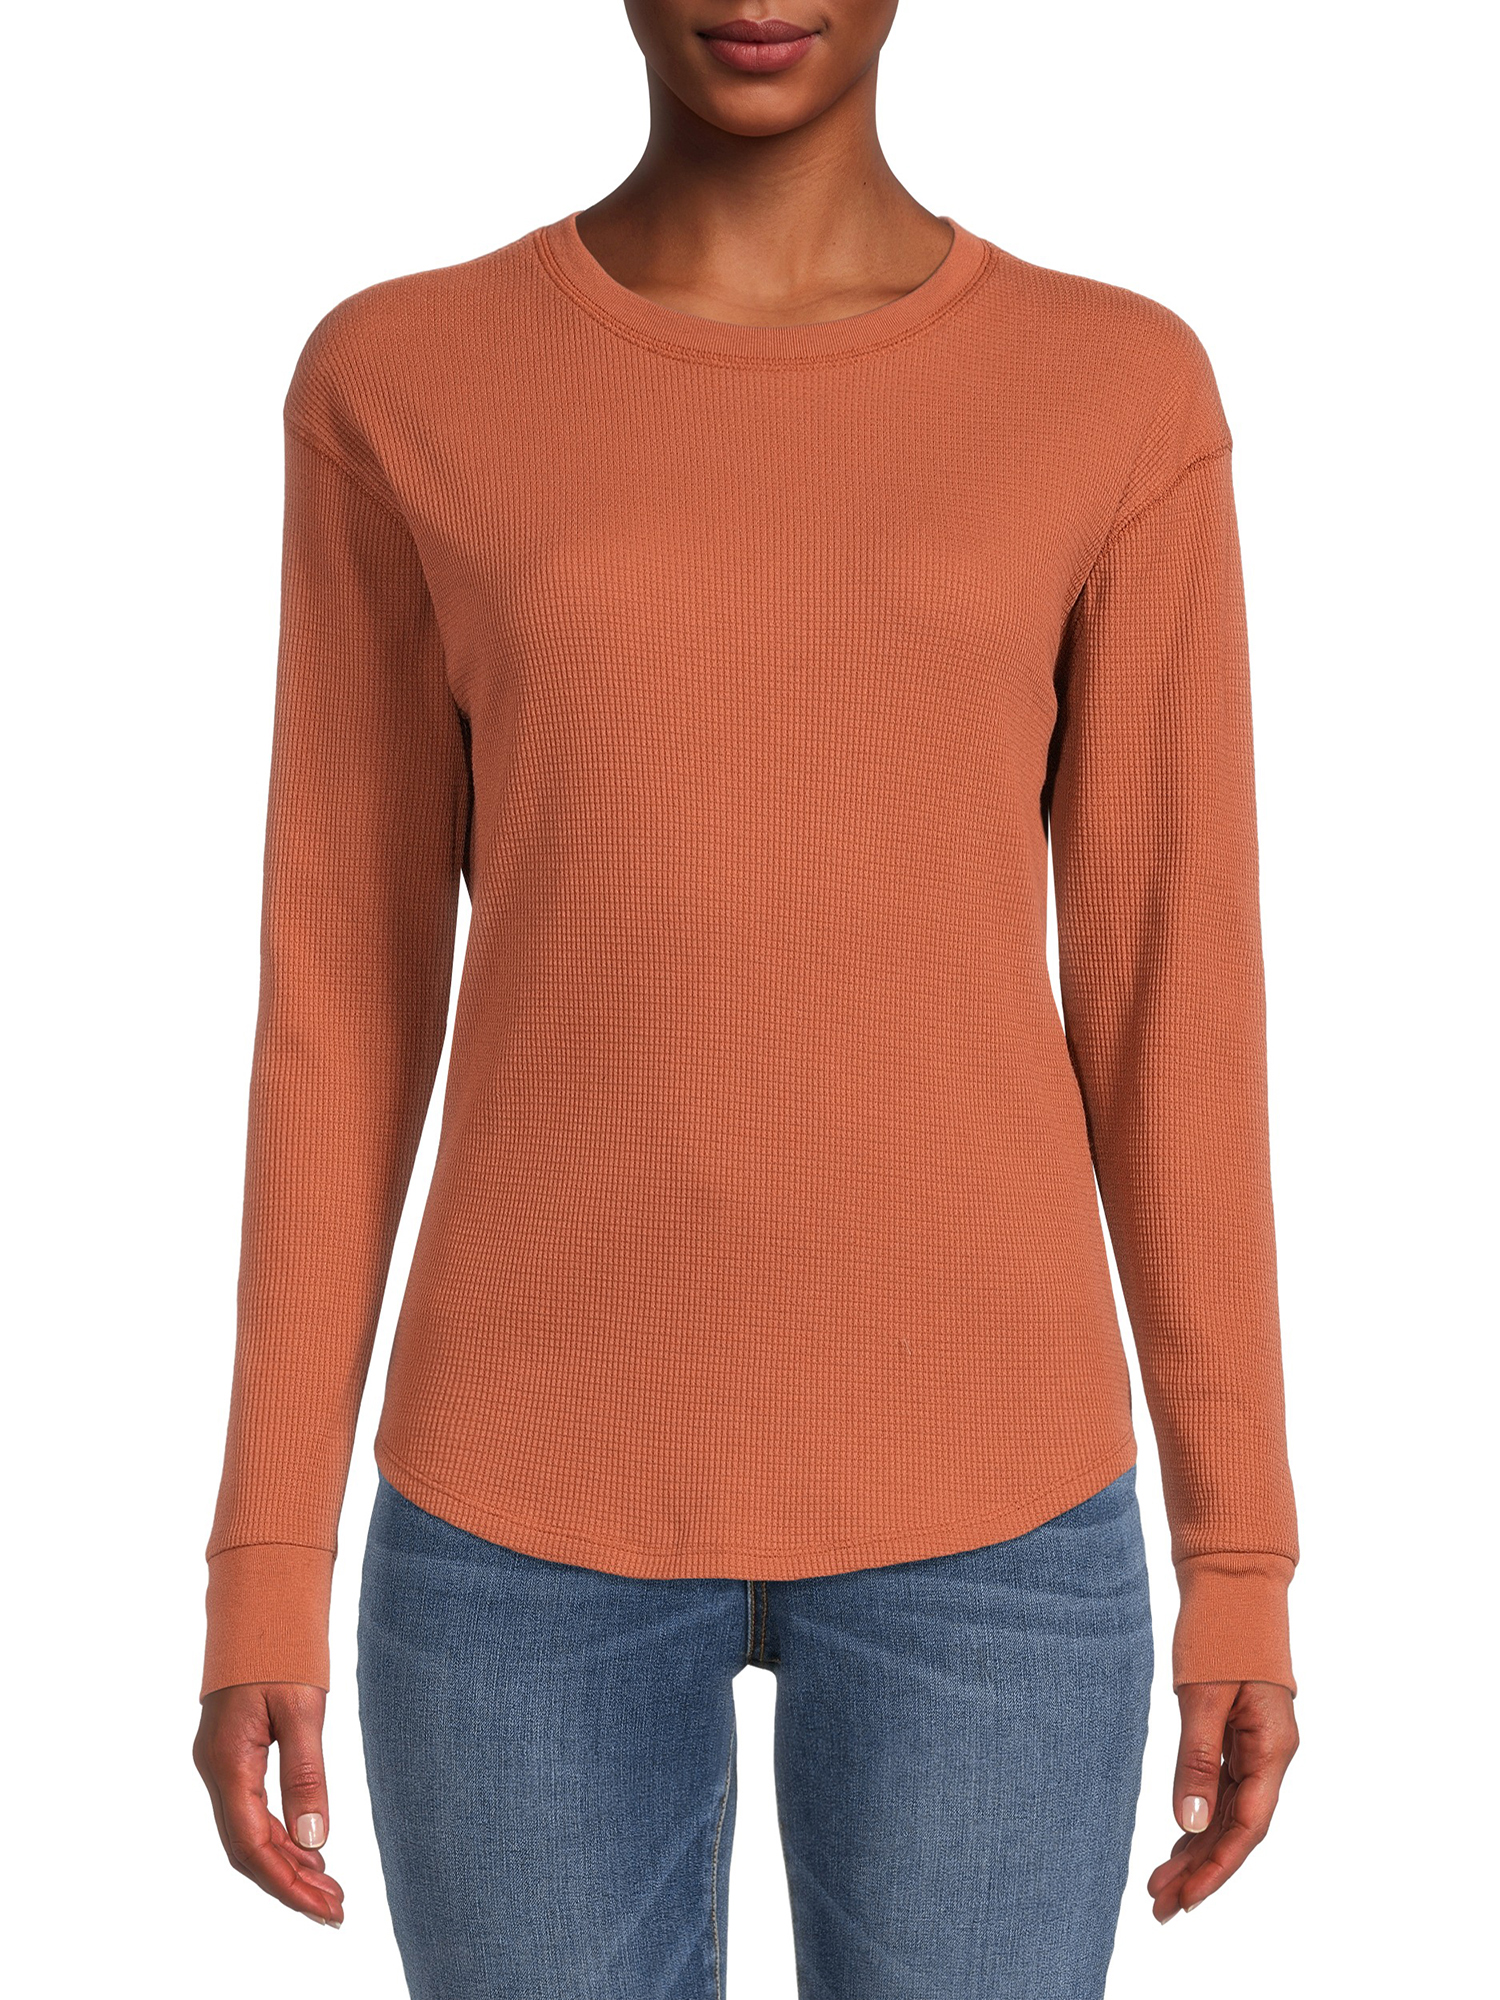 Time and Tru Women's Thermal Top with Long Sleeves - image 1 of 5